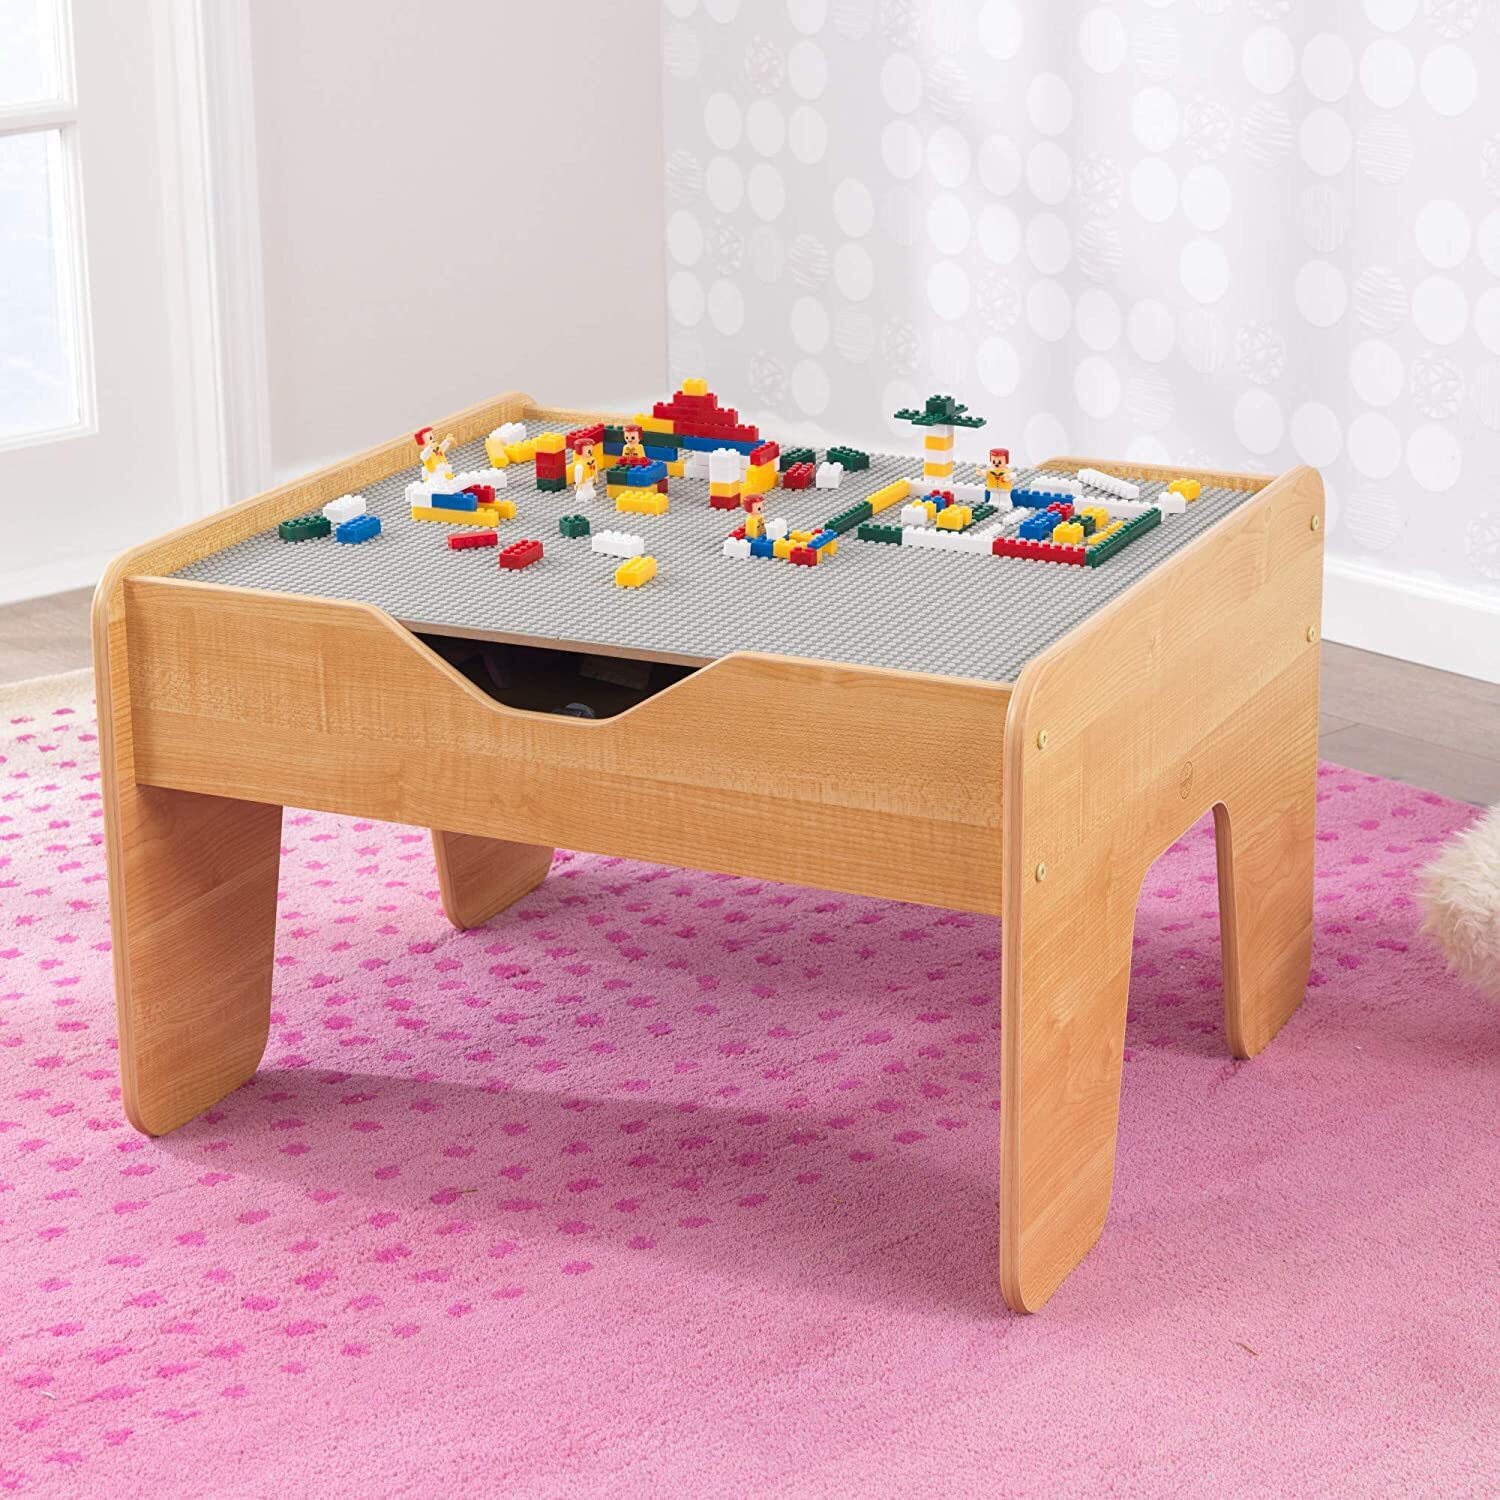 Activity Table with Blocks Set